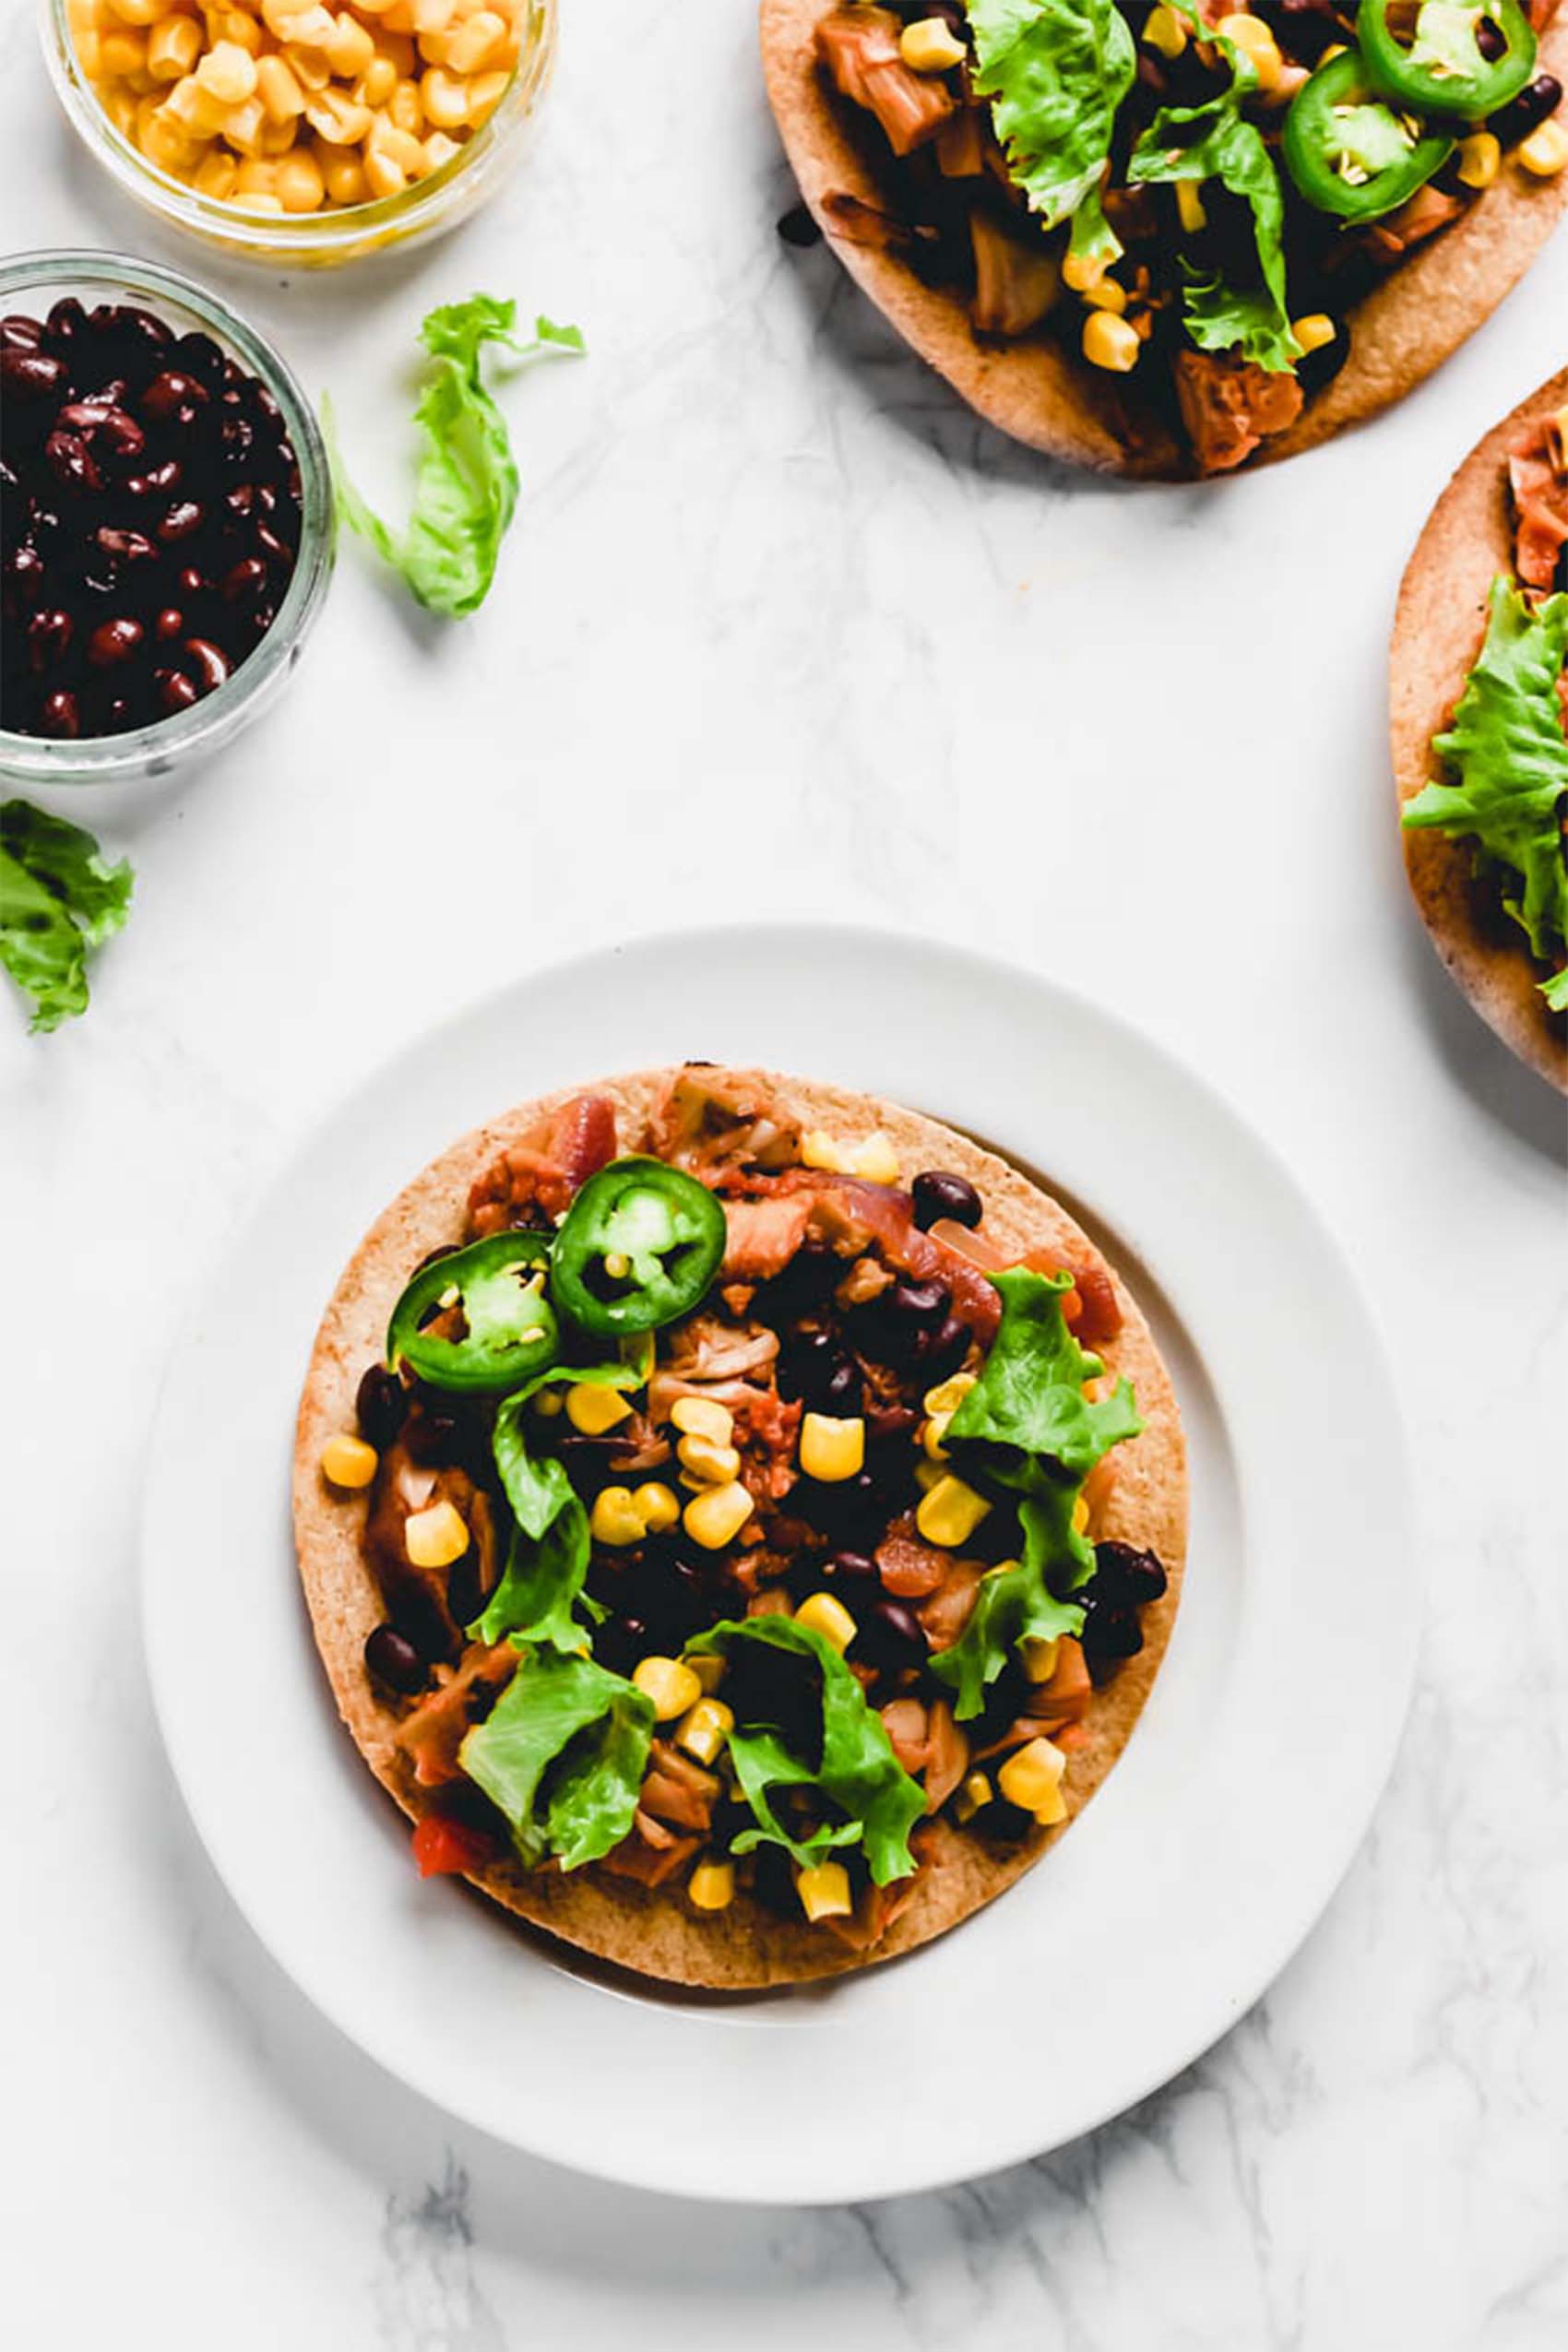 a black bean tostada topped with sliced jalapeno